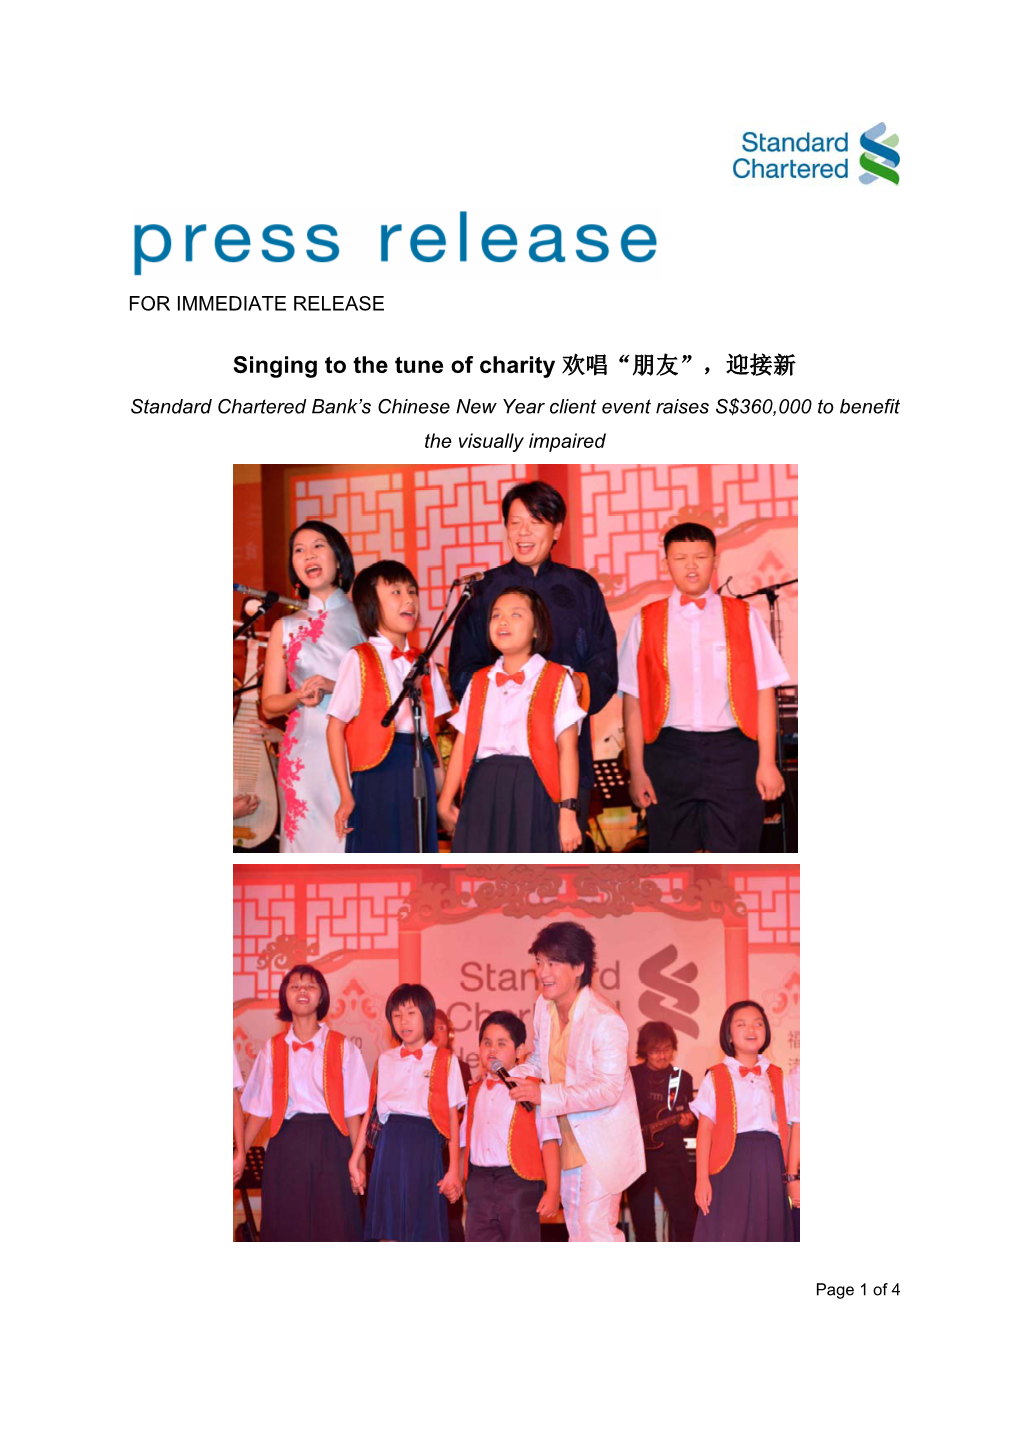 Singing to the Tune of Charity 欢唱“朋友”，迎接新 Standard Chartered Bank’S Chinese New Year Client Event Raises S$360,000 to Benefit the Visually Impaired